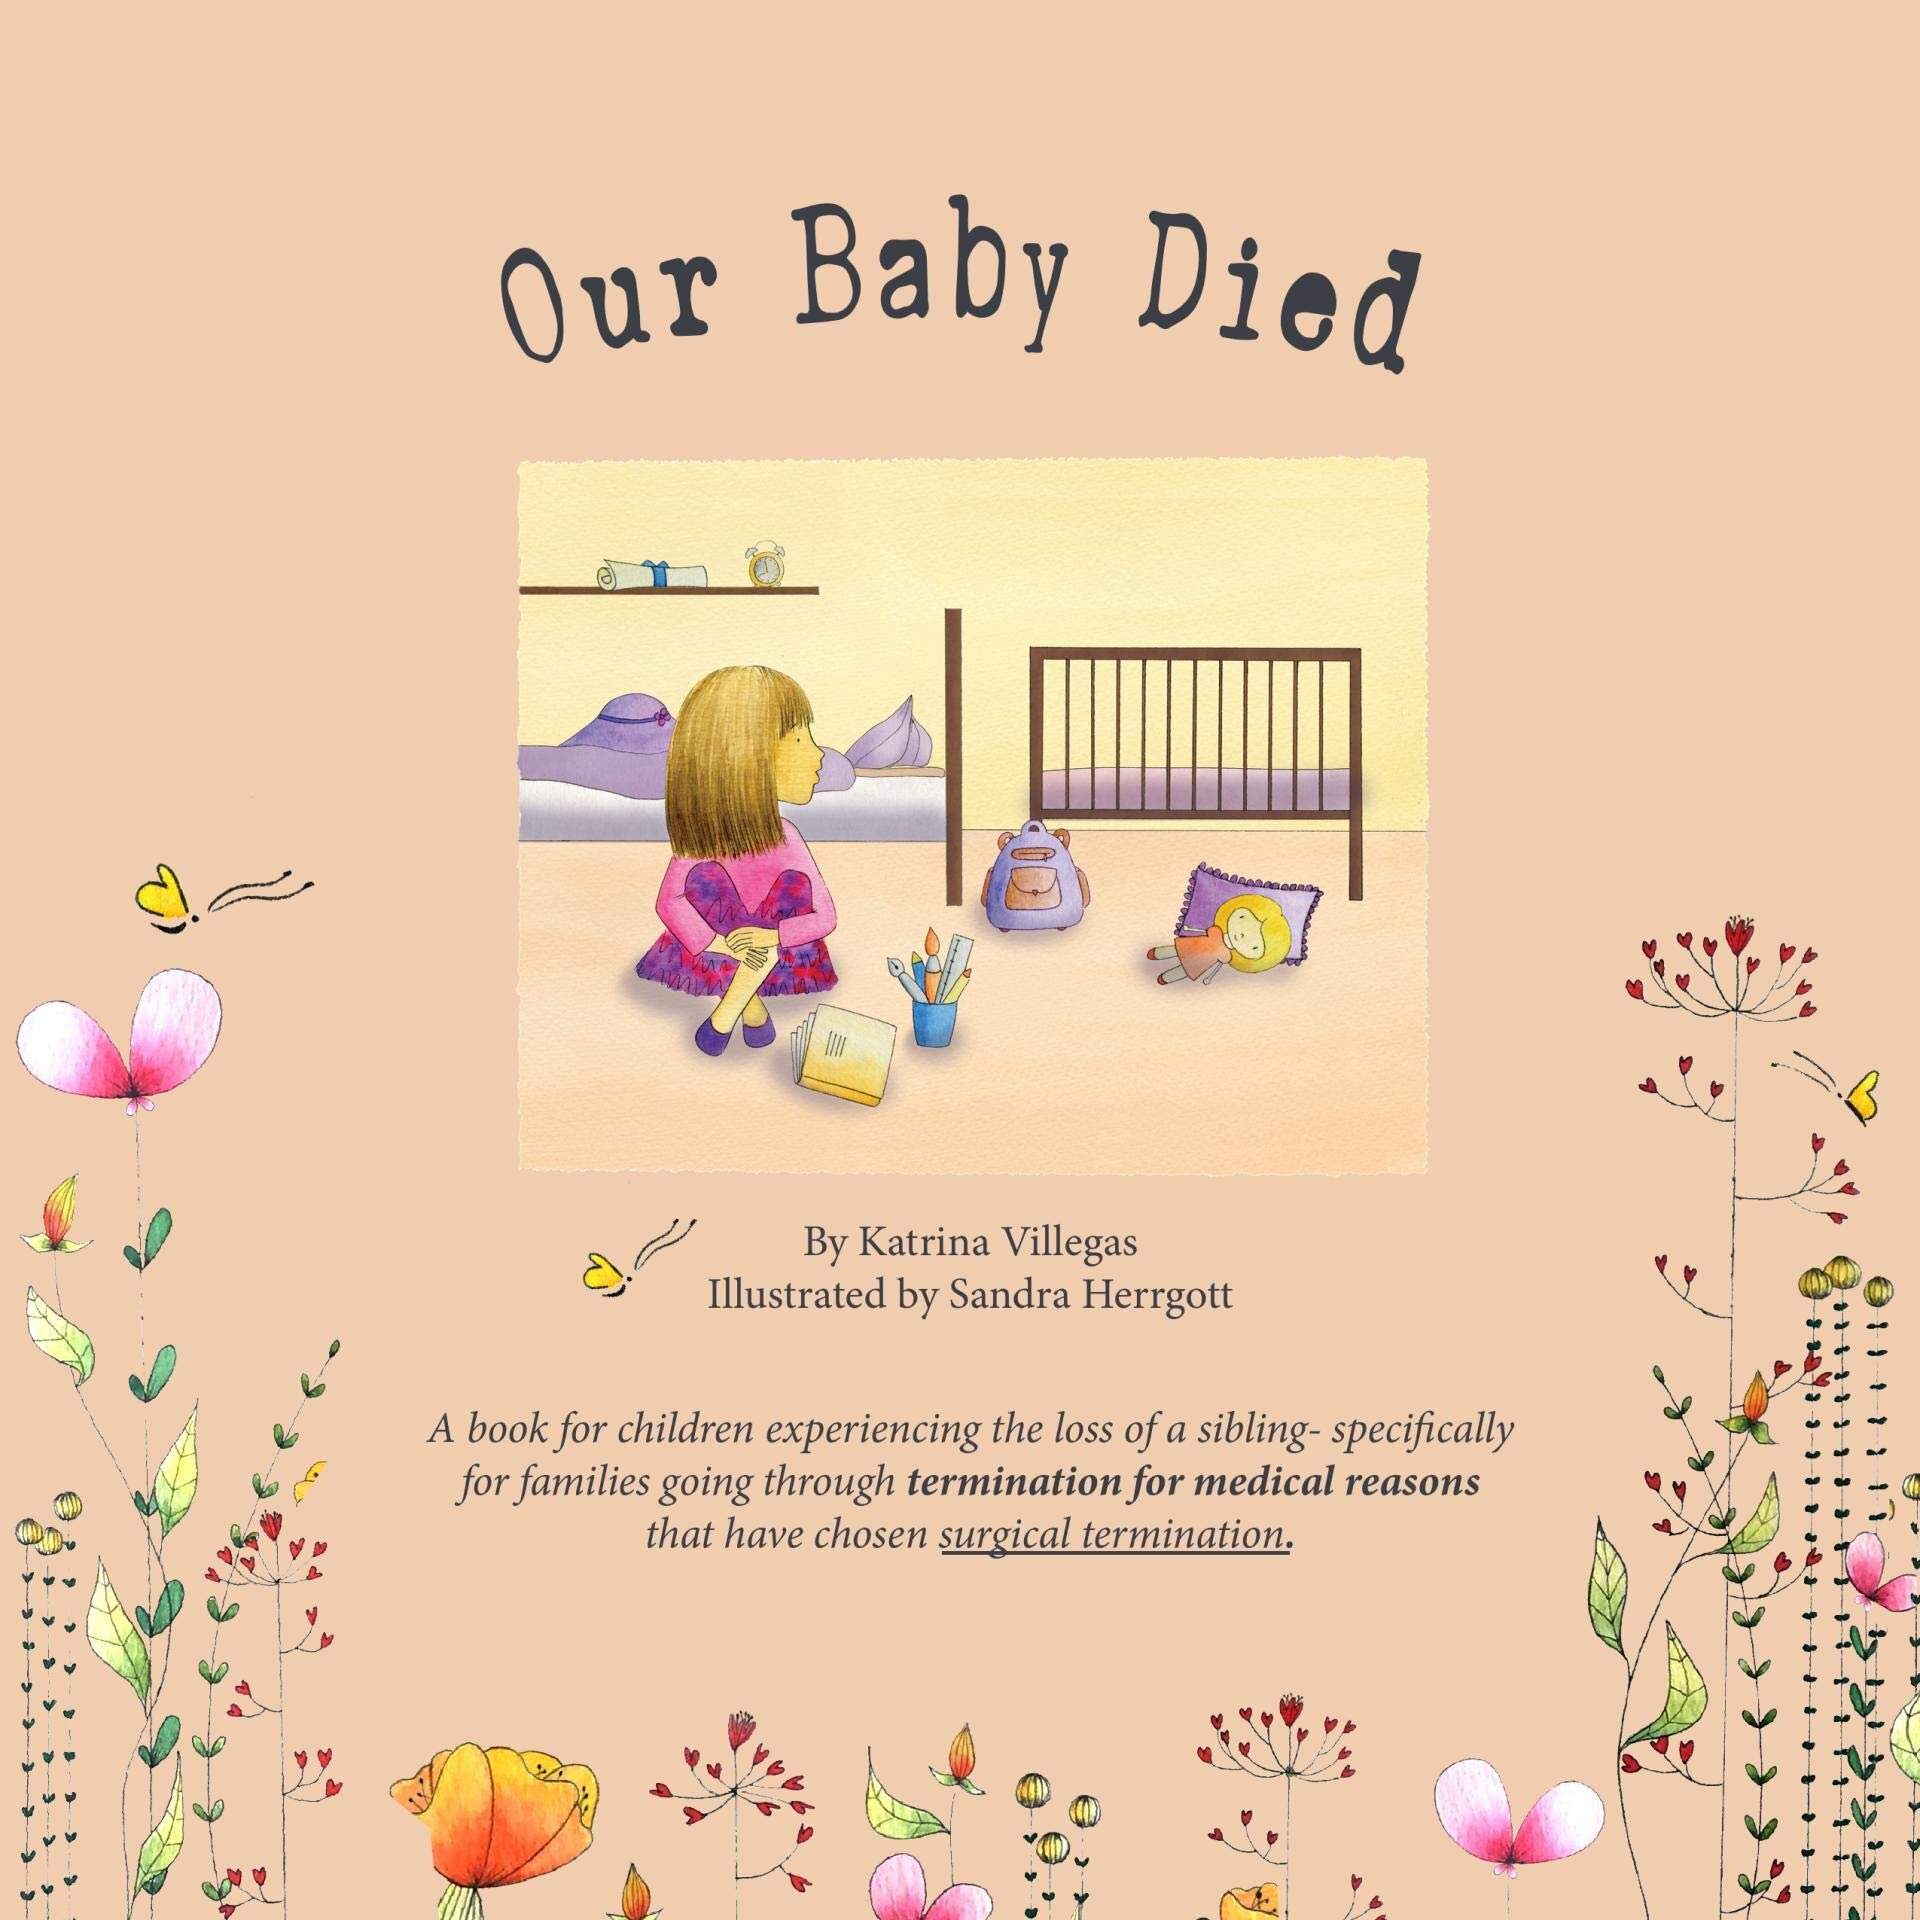 Our Baby Died: The road of grief during the death of a sibling. Coping with the loss and understanding death. (Copy) (Copy)